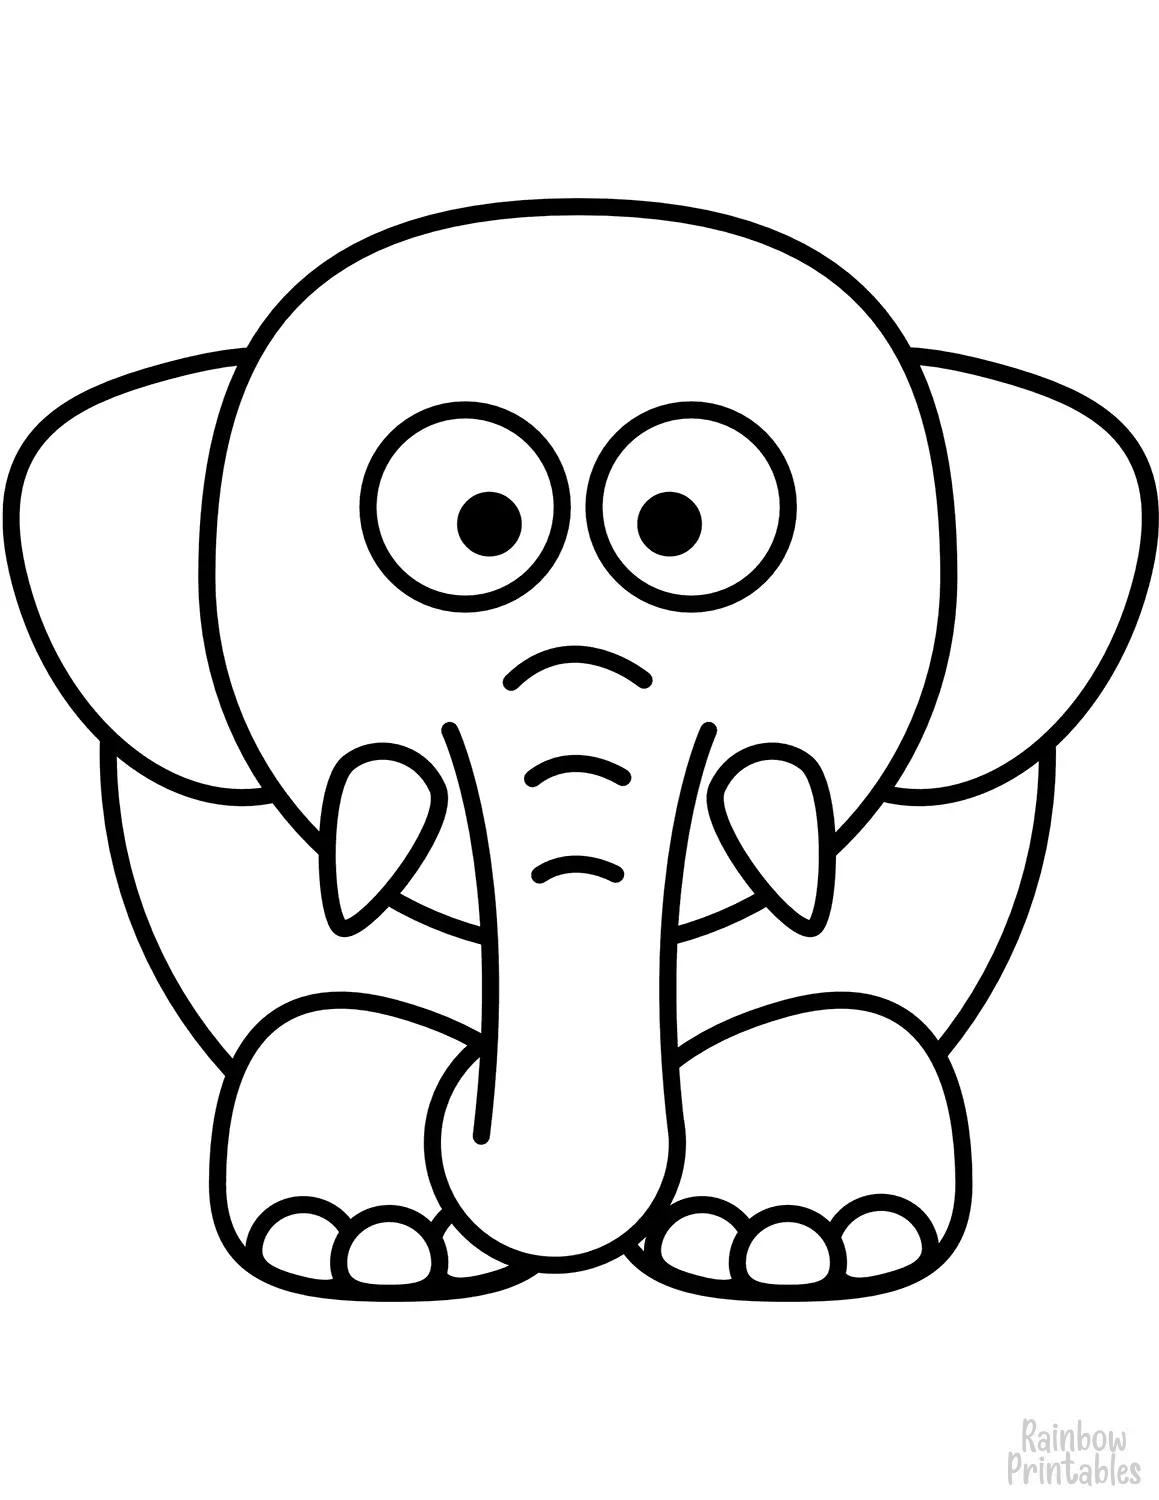 Cute-elephant-animal-coloring-page-for-kids